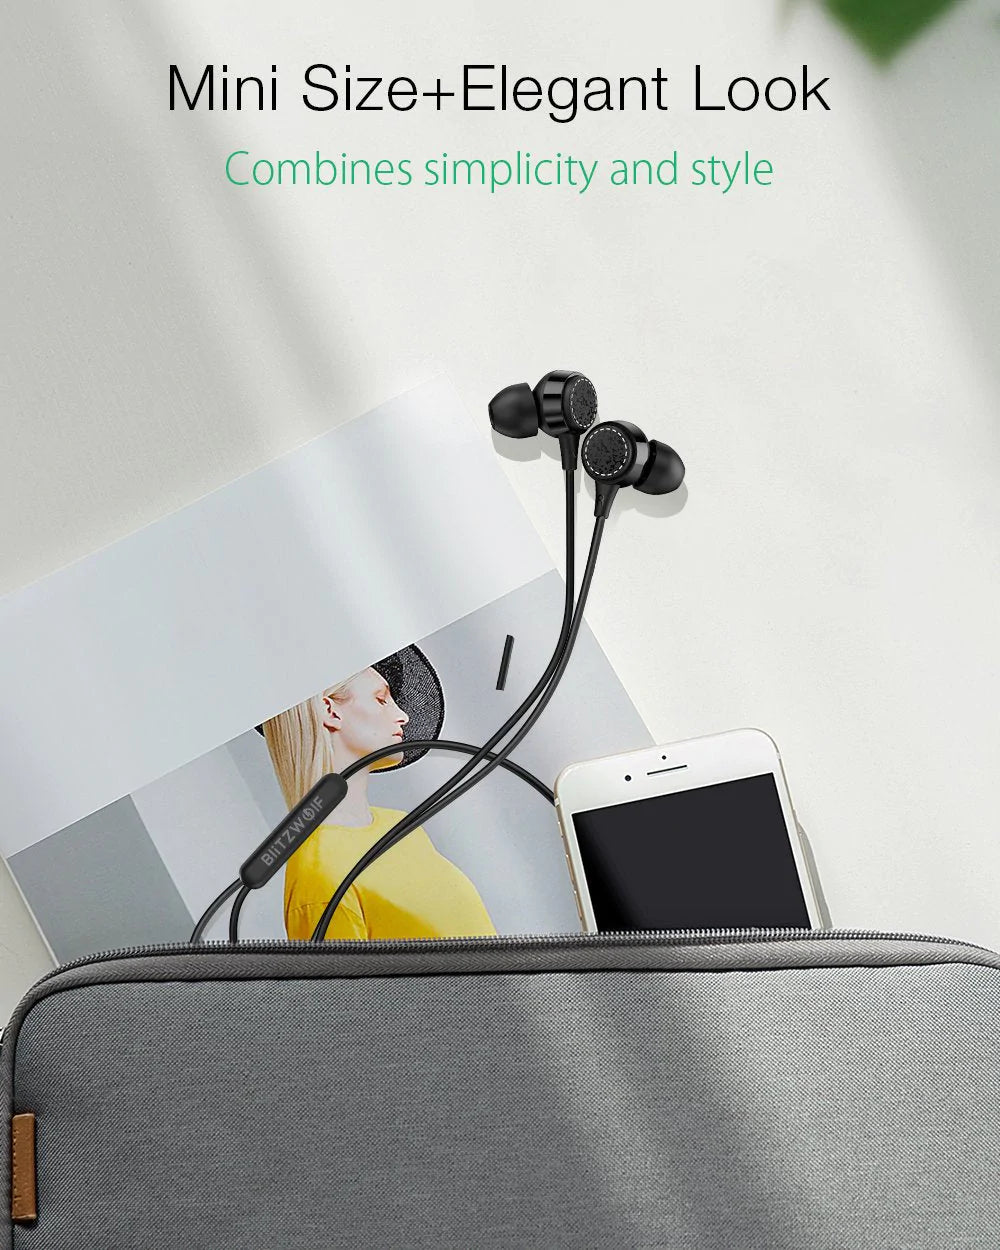 BlitzWolf BW-ES3 In Ear Earphone w/ Dynamic Driver Stereo Audio and 3.5mm Connection IPX5 Waterproof Earphone with Mic - Buy Confidently with Smart Sales Australia